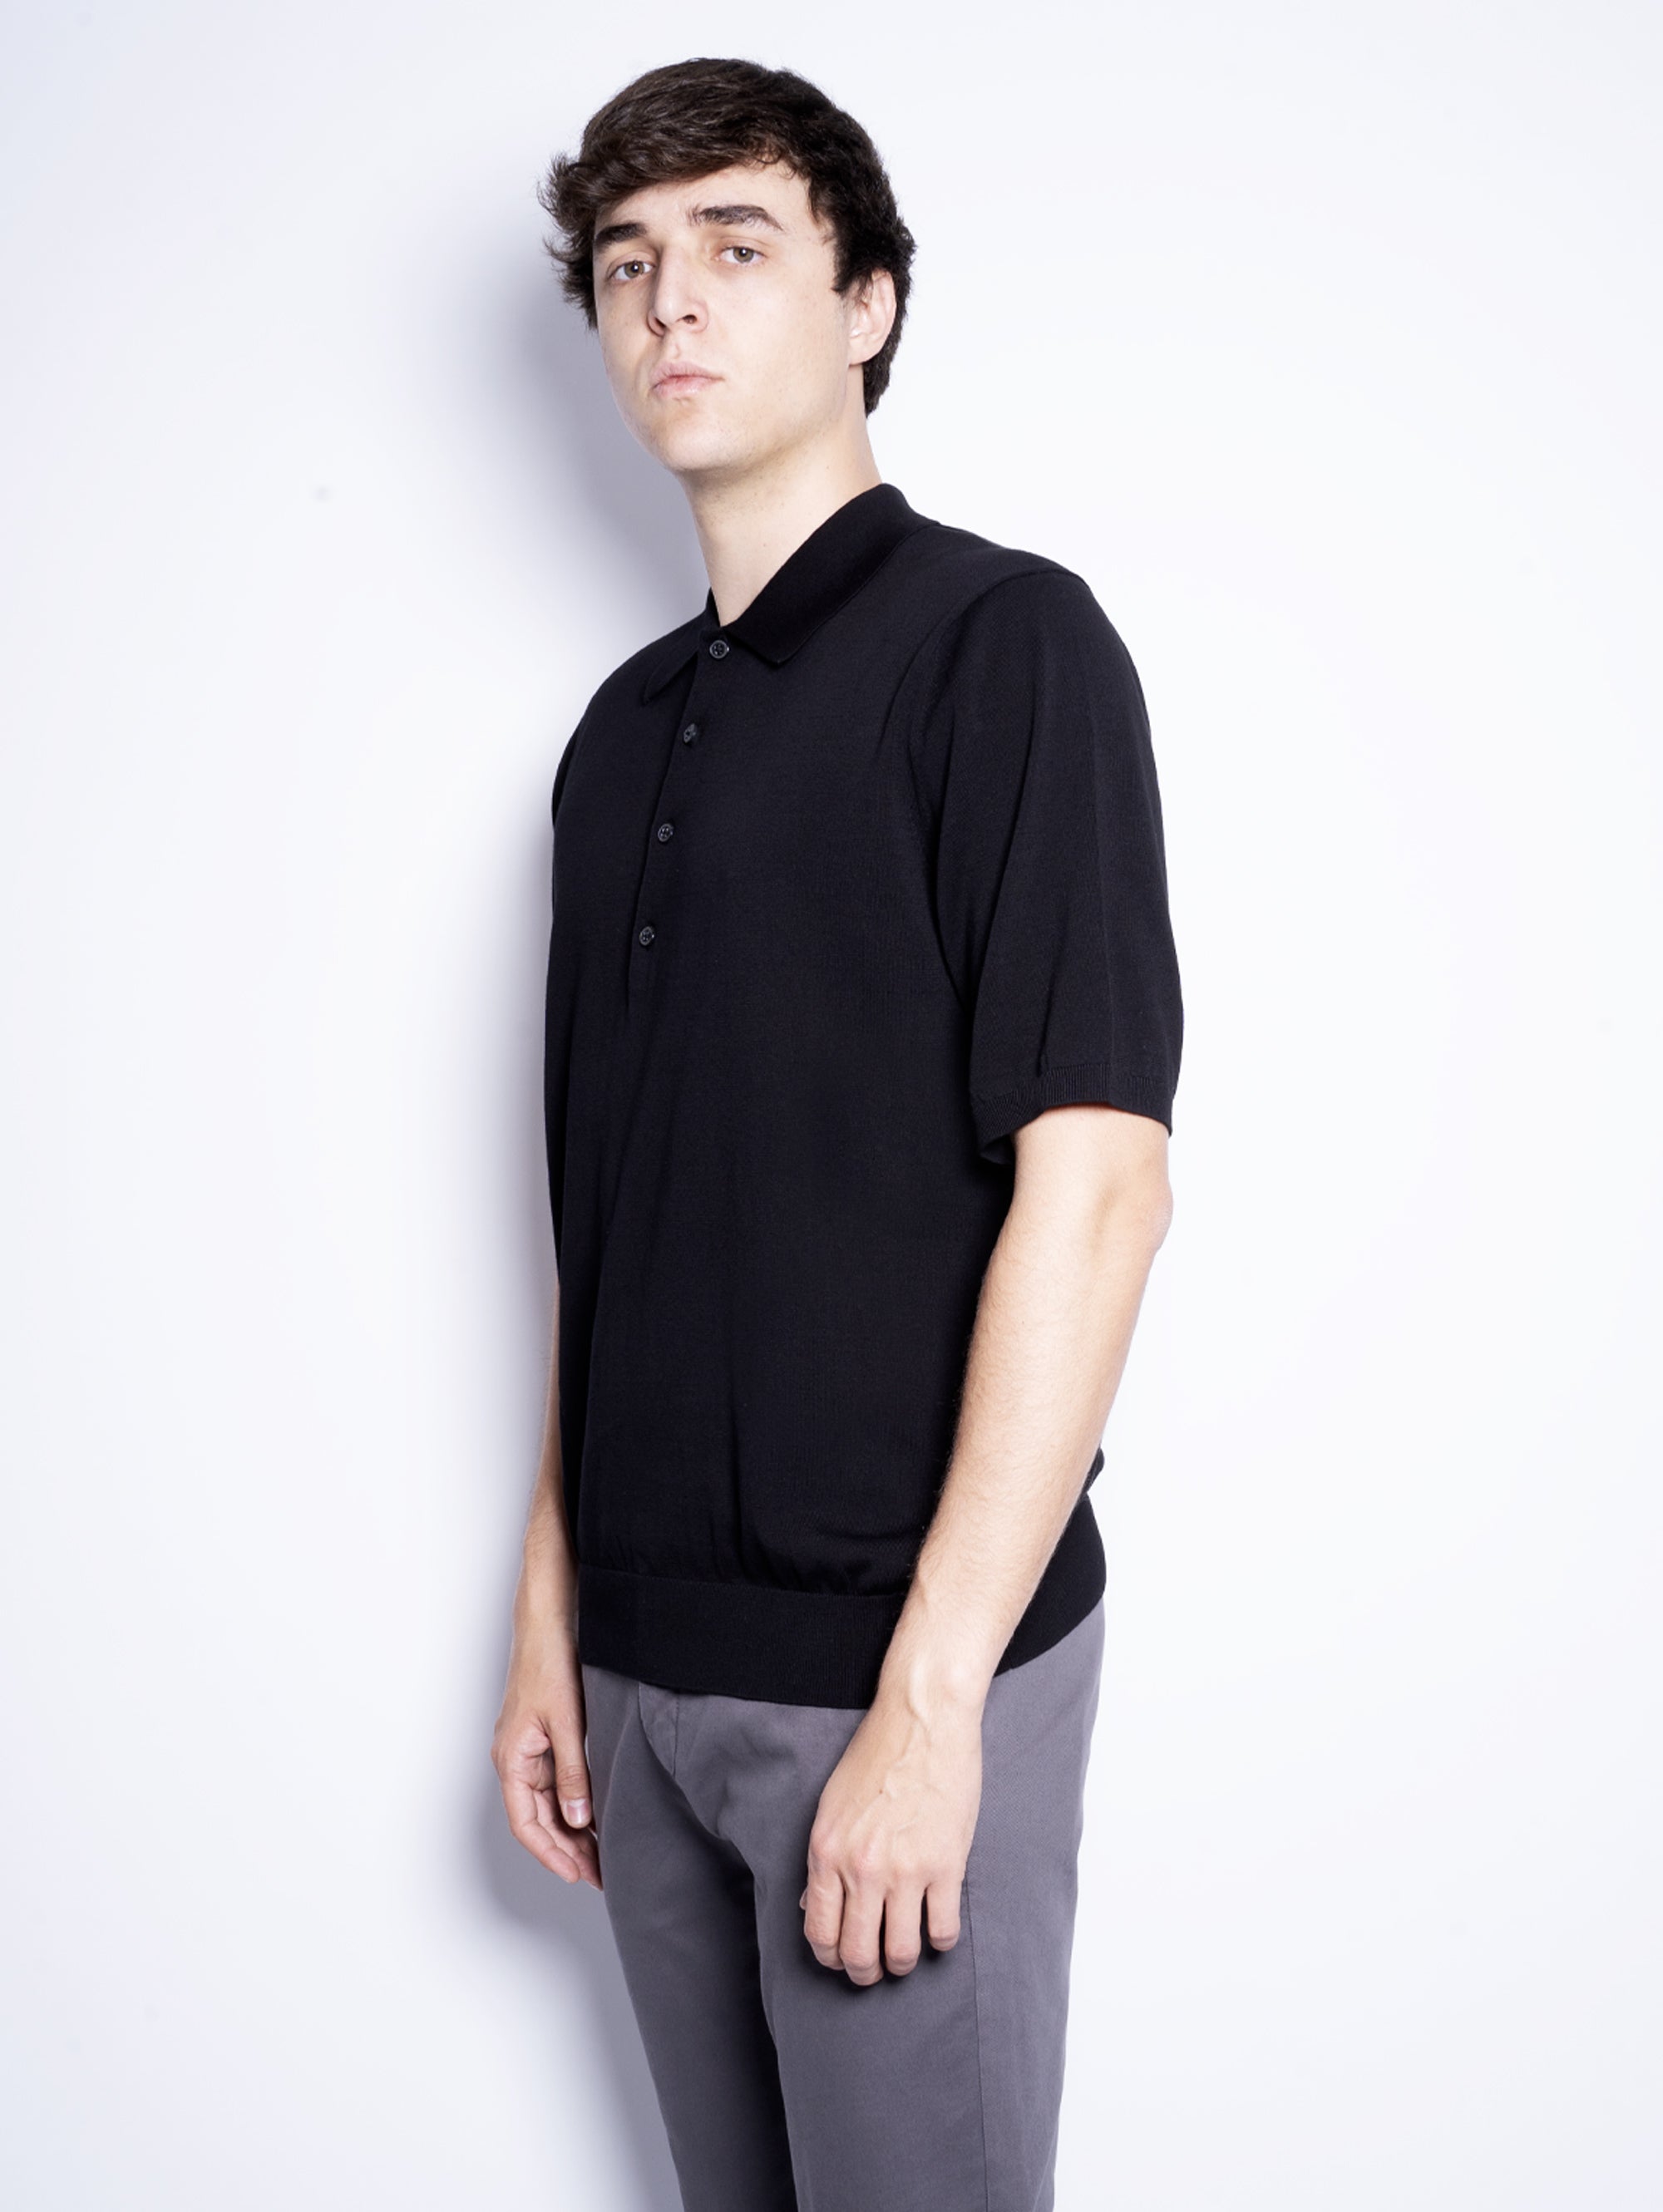 Polo shirt in black extrafine cotton